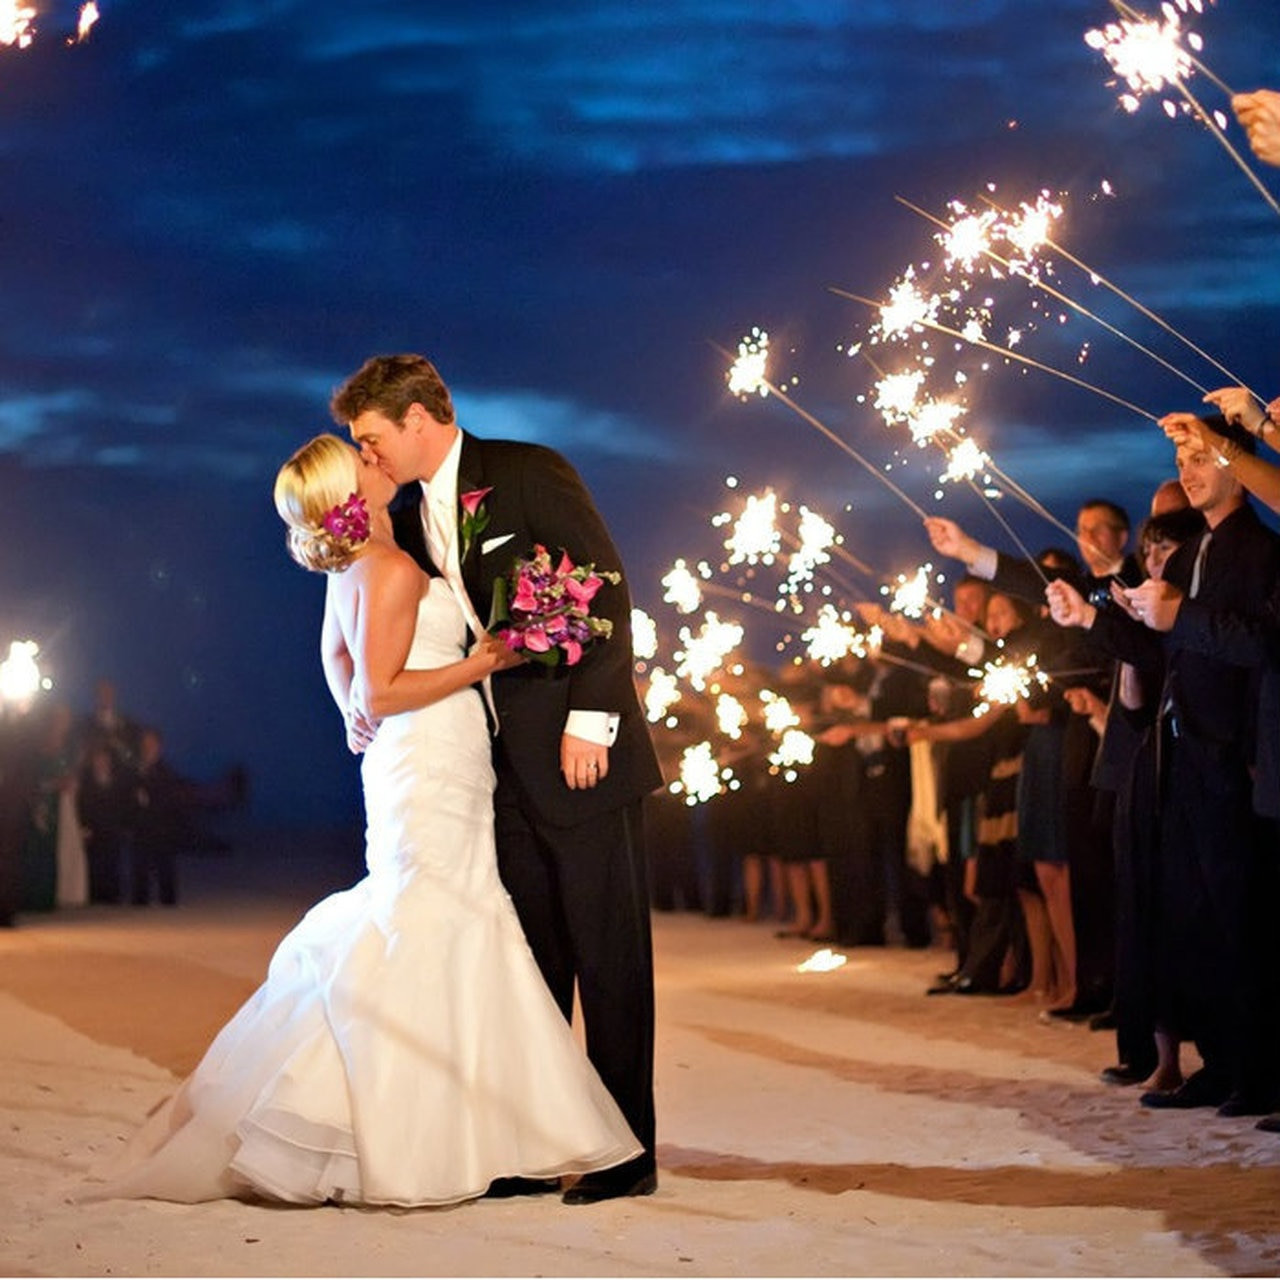 Where To Buy Sparklers For Wedding
 Sparklers — Buy Sparklers line